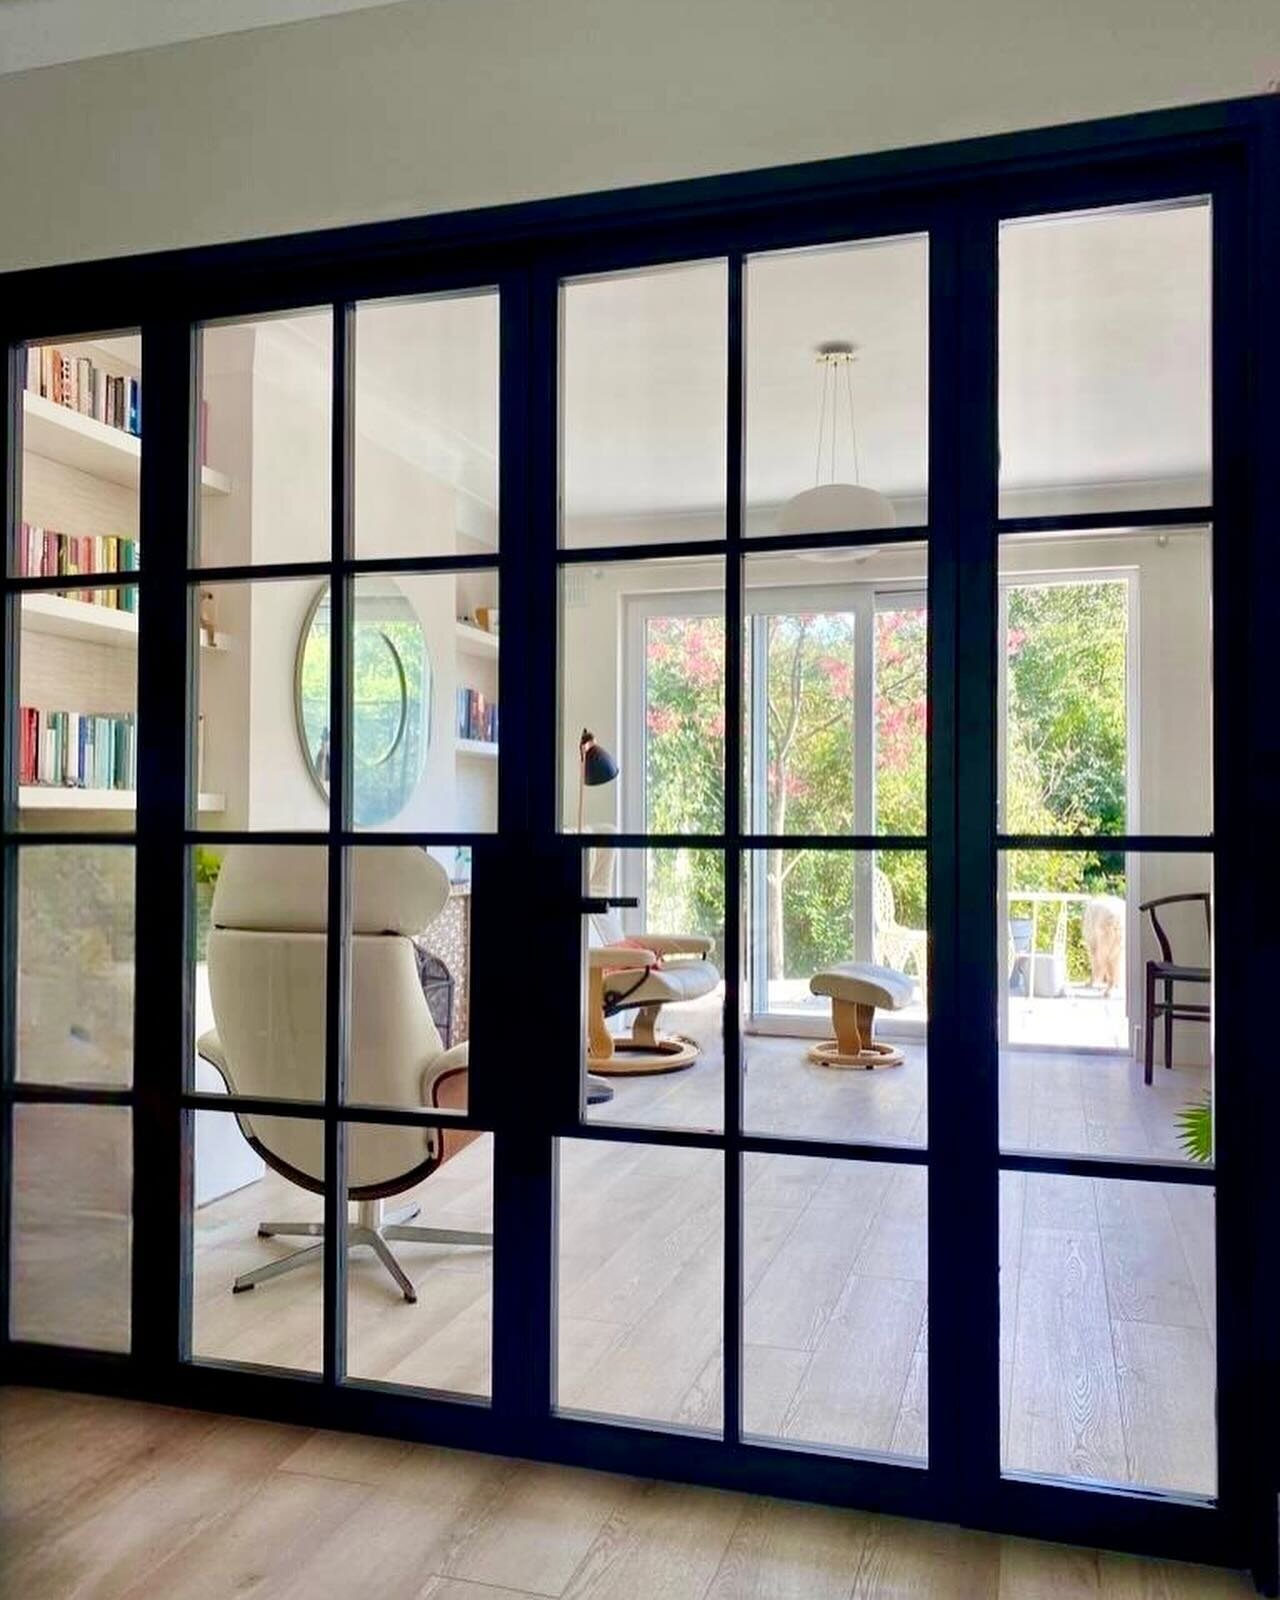 A recently completed room design. The addition of two doors - one out to the garden and an internal crittall one helped transform this room creating a more functional, bright and airy space catered specifically to this family&rsquo;s needs. Swipe for